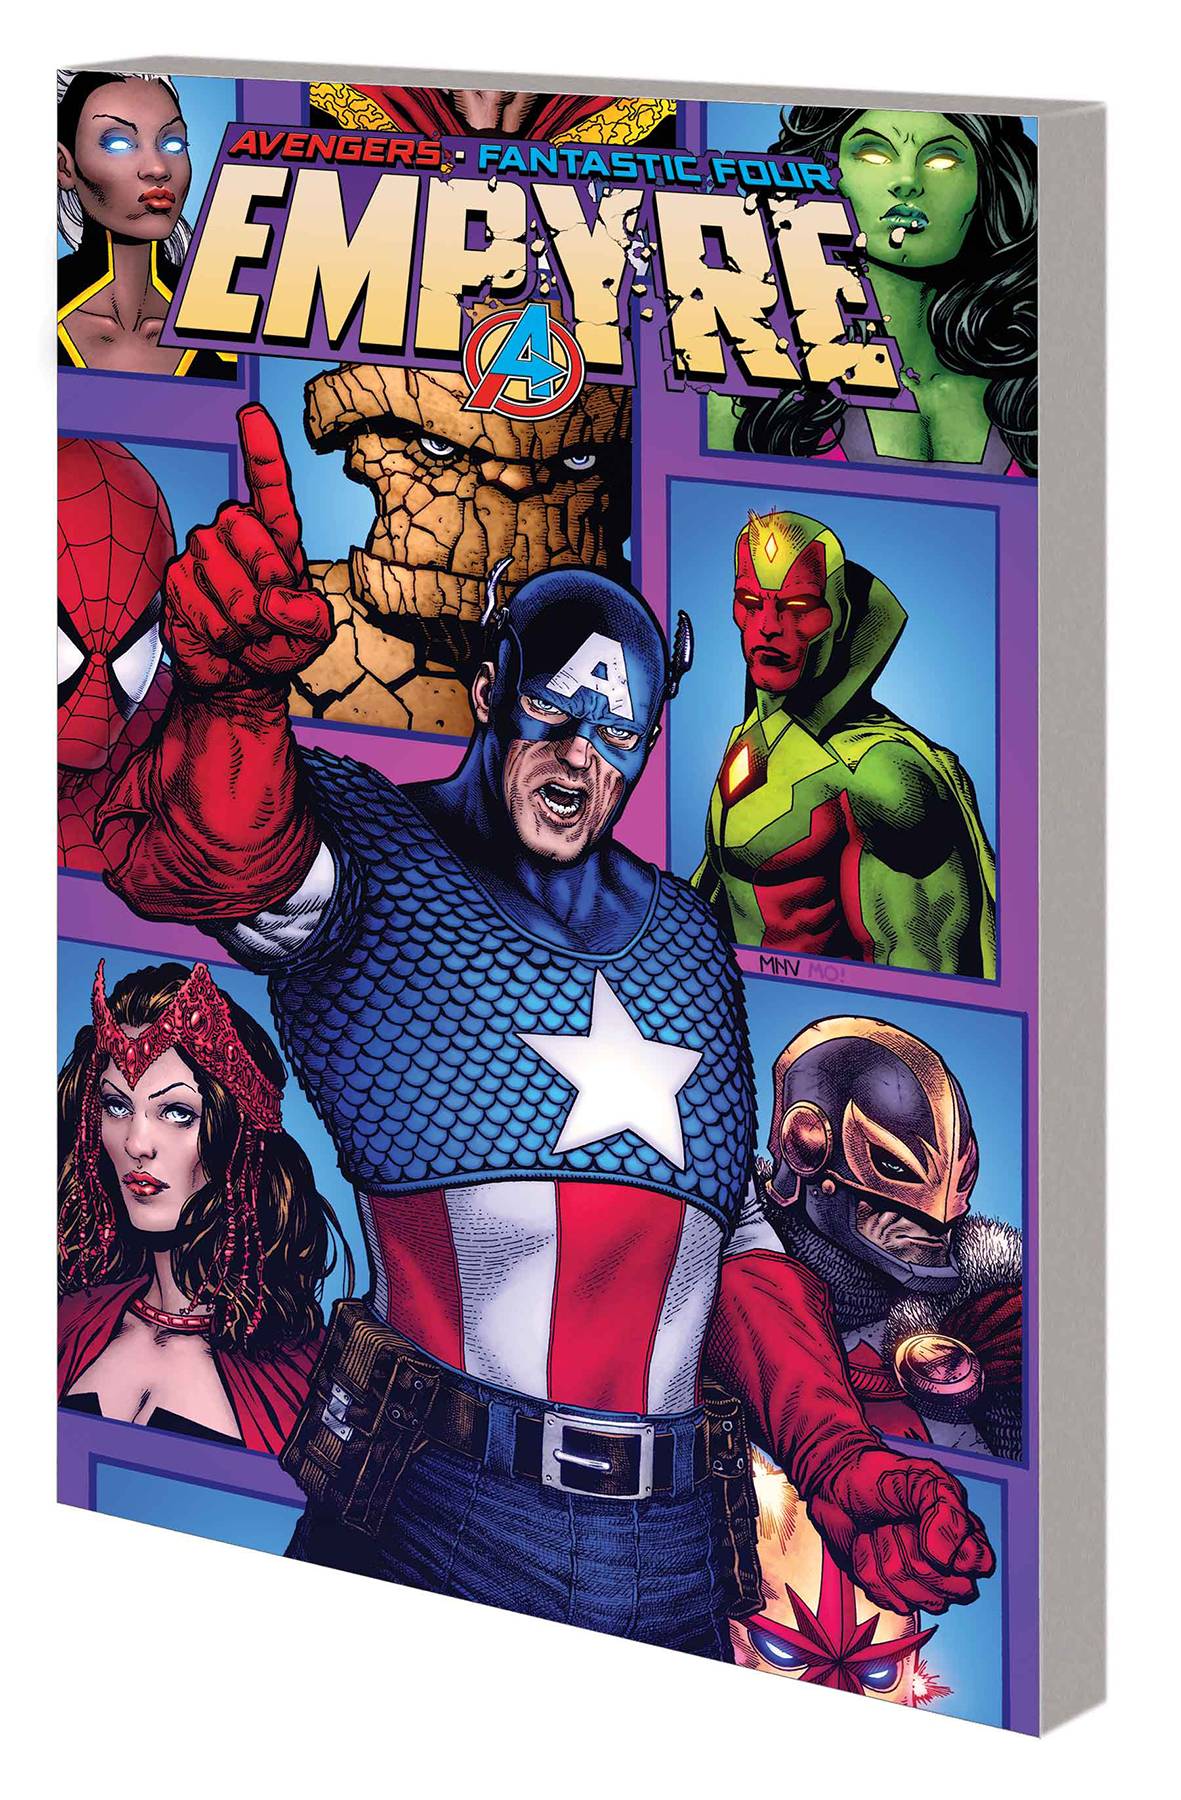 EMPYRE CAPTAIN AMERICA AND AVENGERS TP